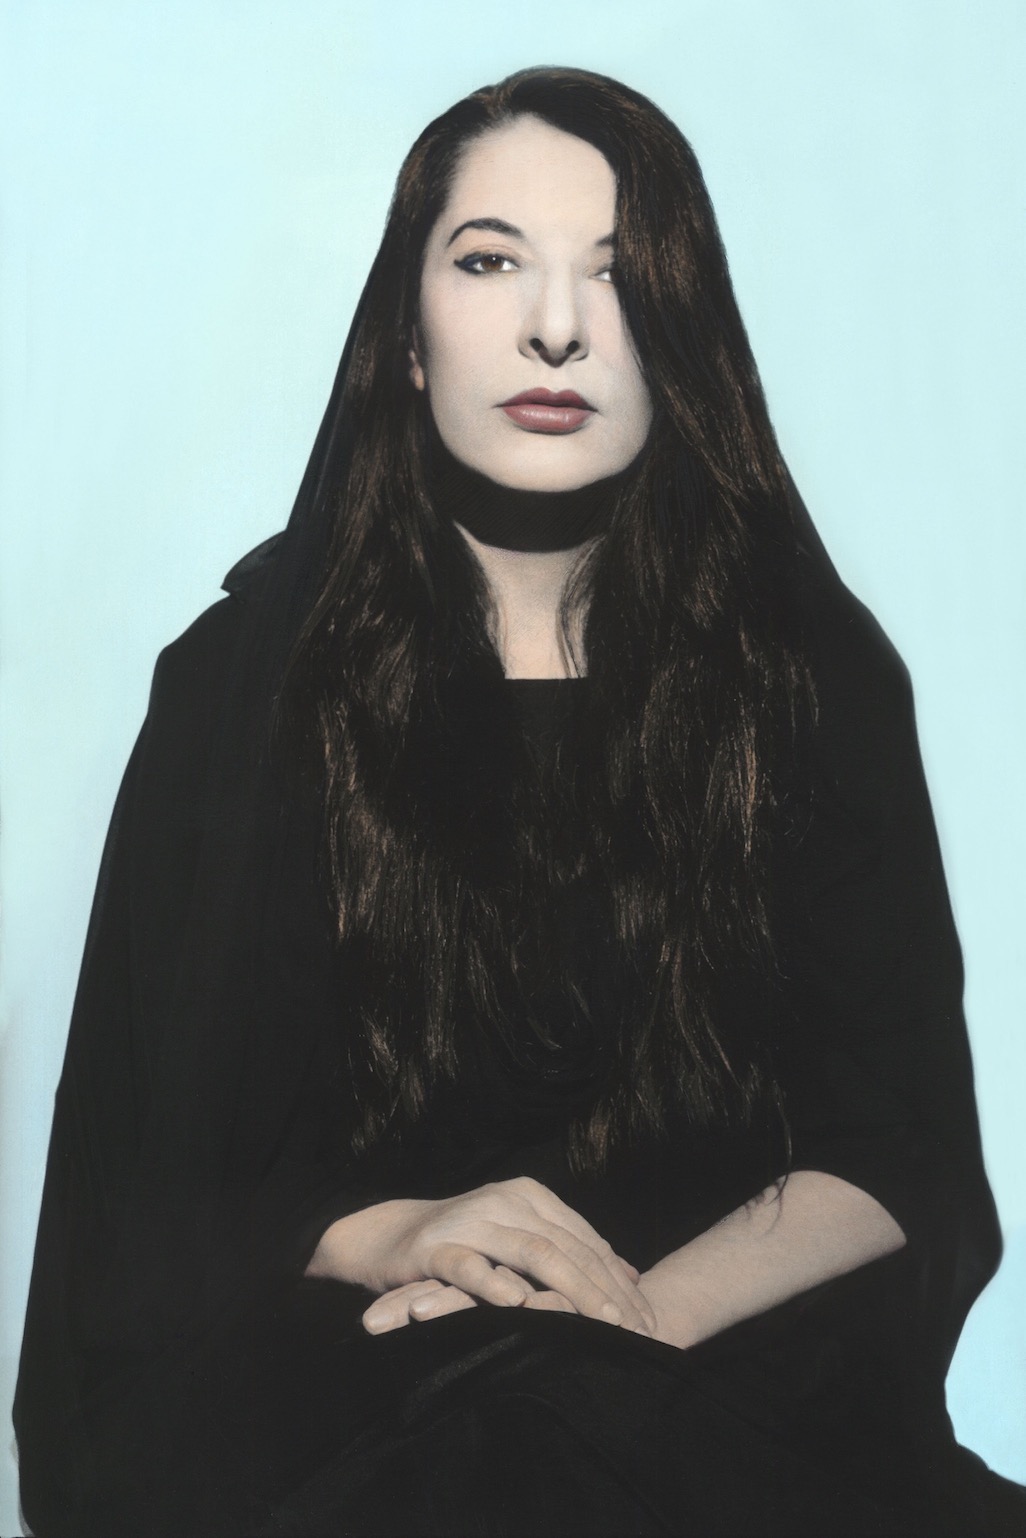 Youssef Nabil - Marina Abramović, New York 2011 Hand colored gelatin silver print Courtesy of the Artist and Nathalie Obadia Gallery, Paris/ Brussels